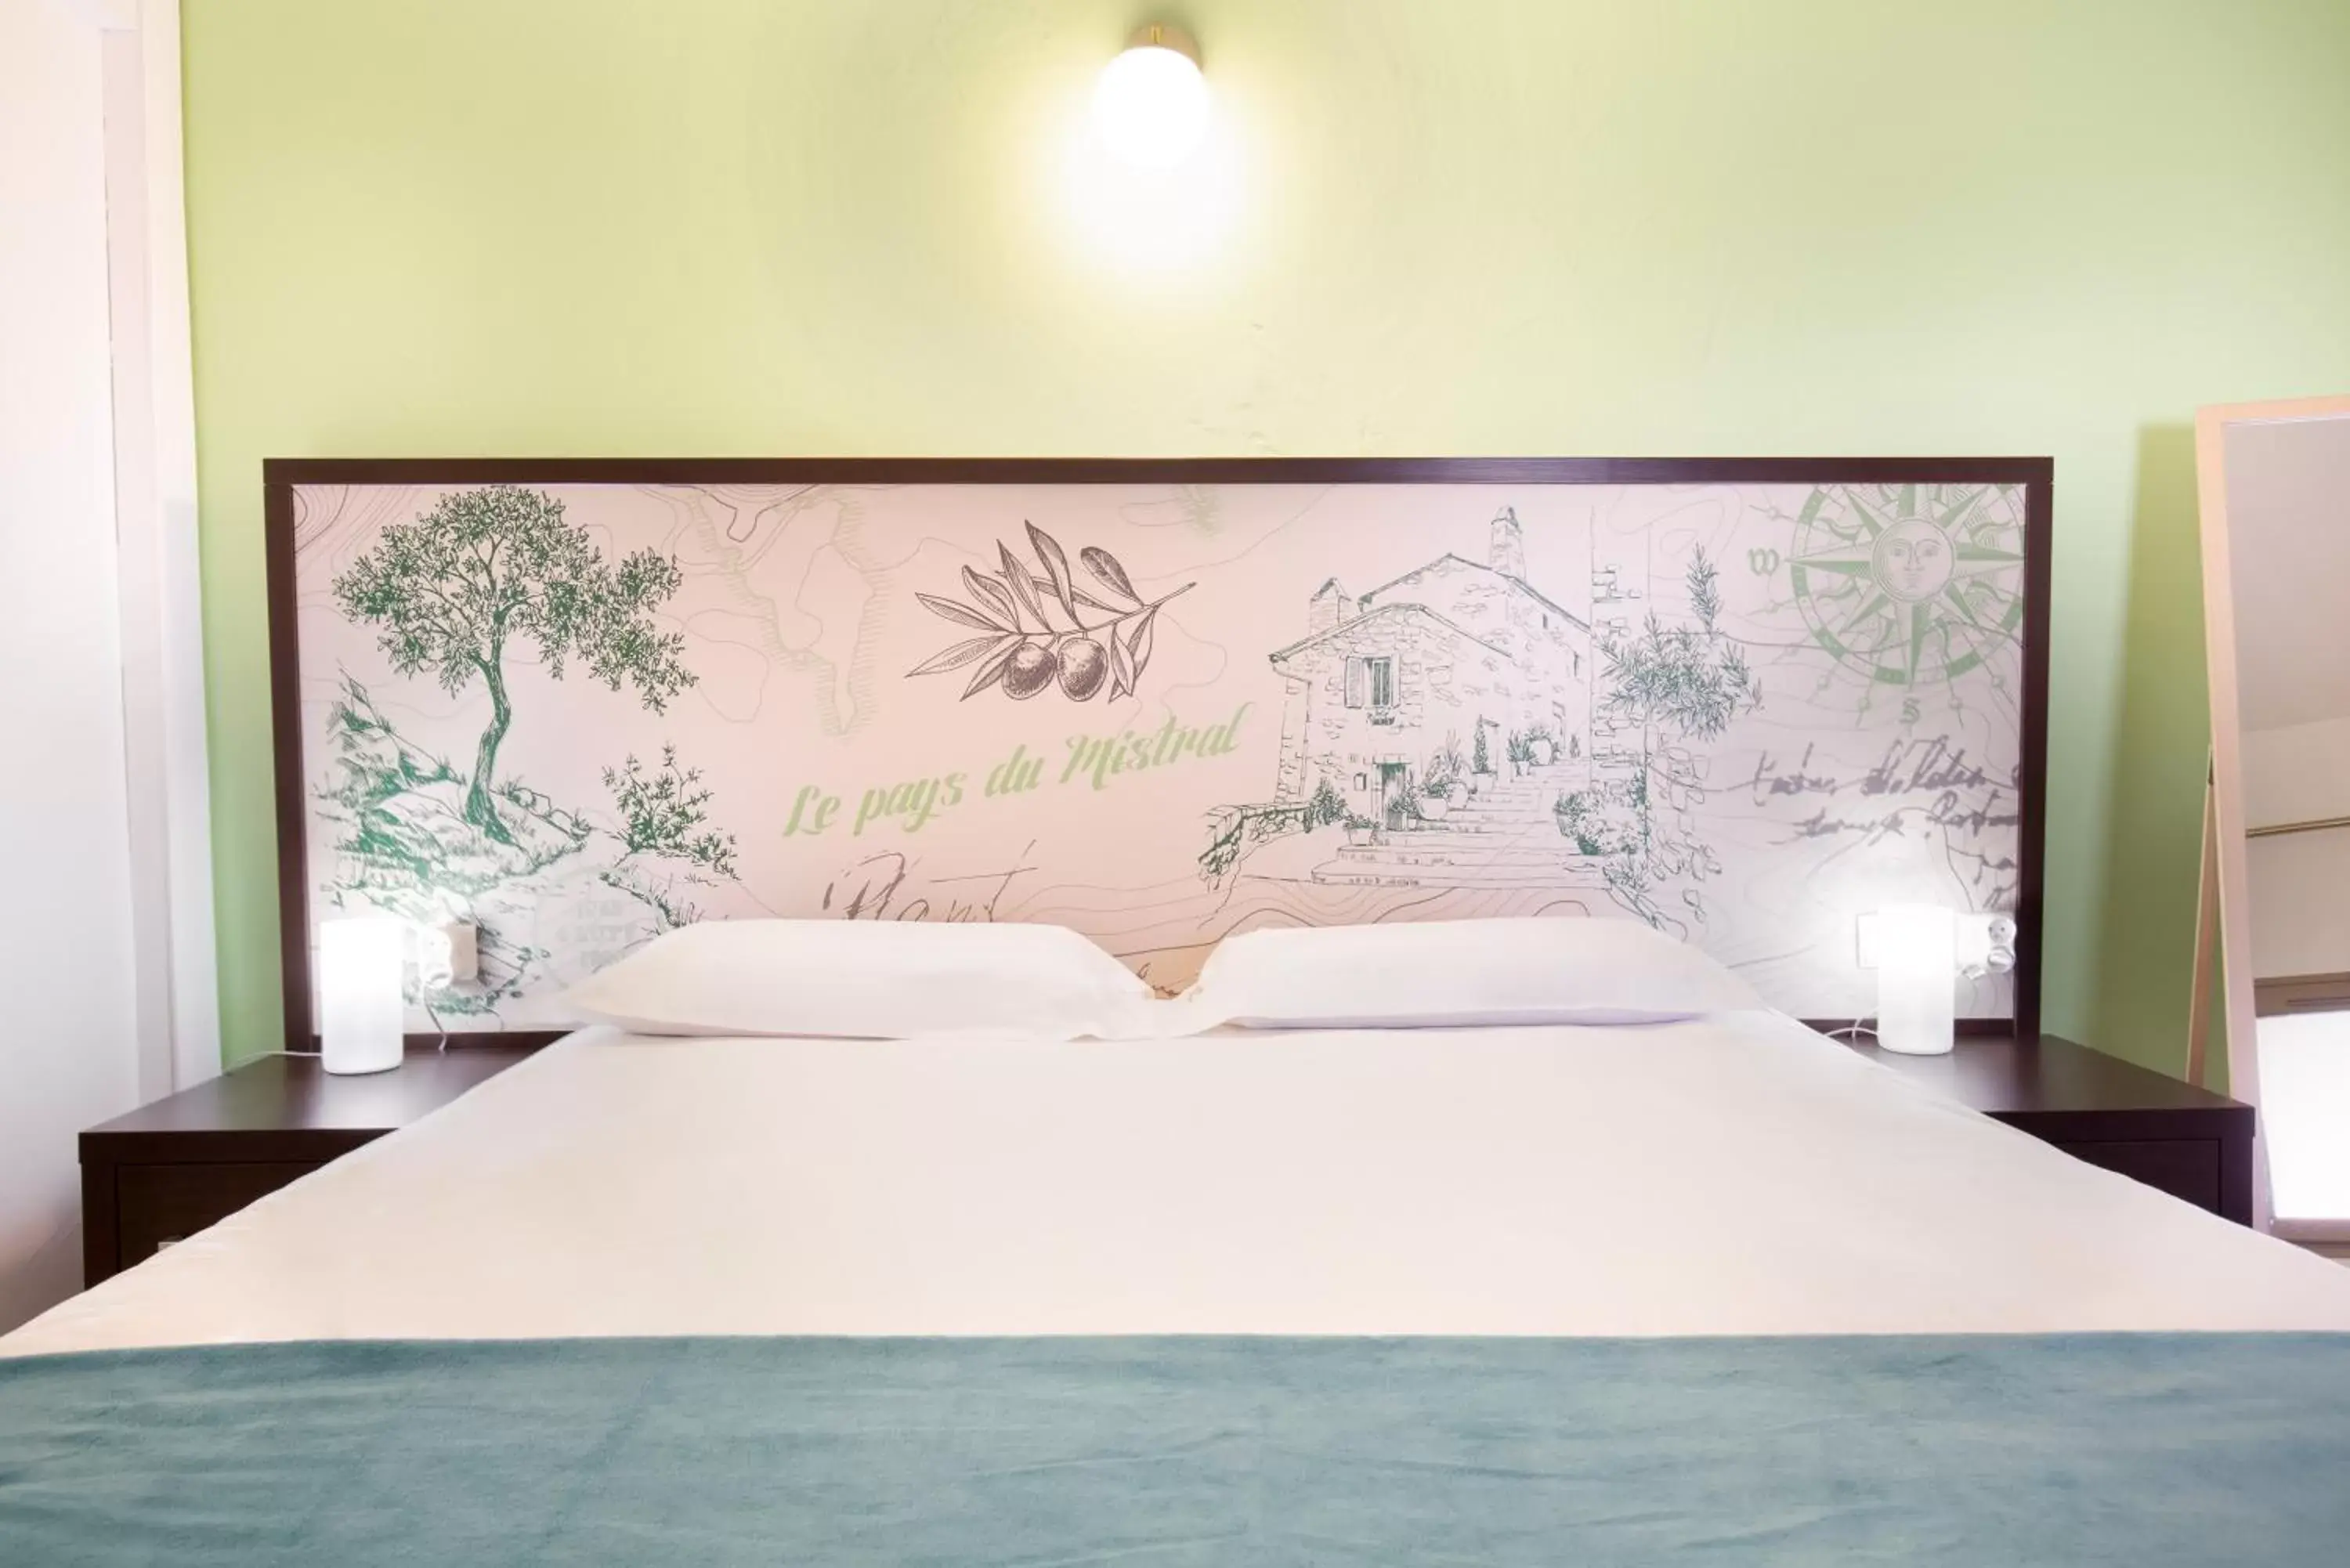 Bed in Les Pins Blancs en Provence